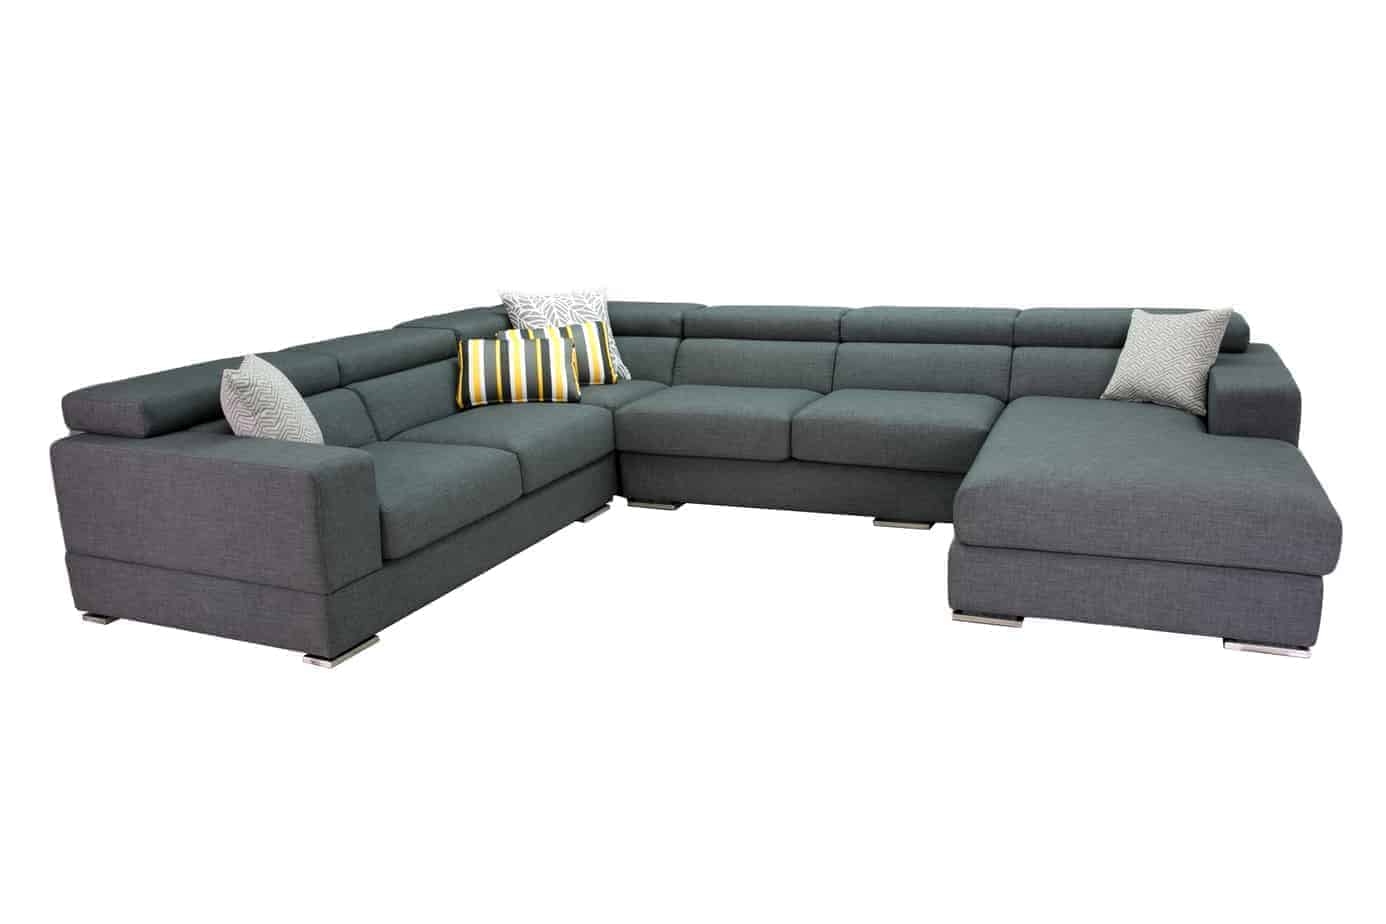 2 corner Chaise lounge Australian Made Sydney available at Sydney Lounge Specialist